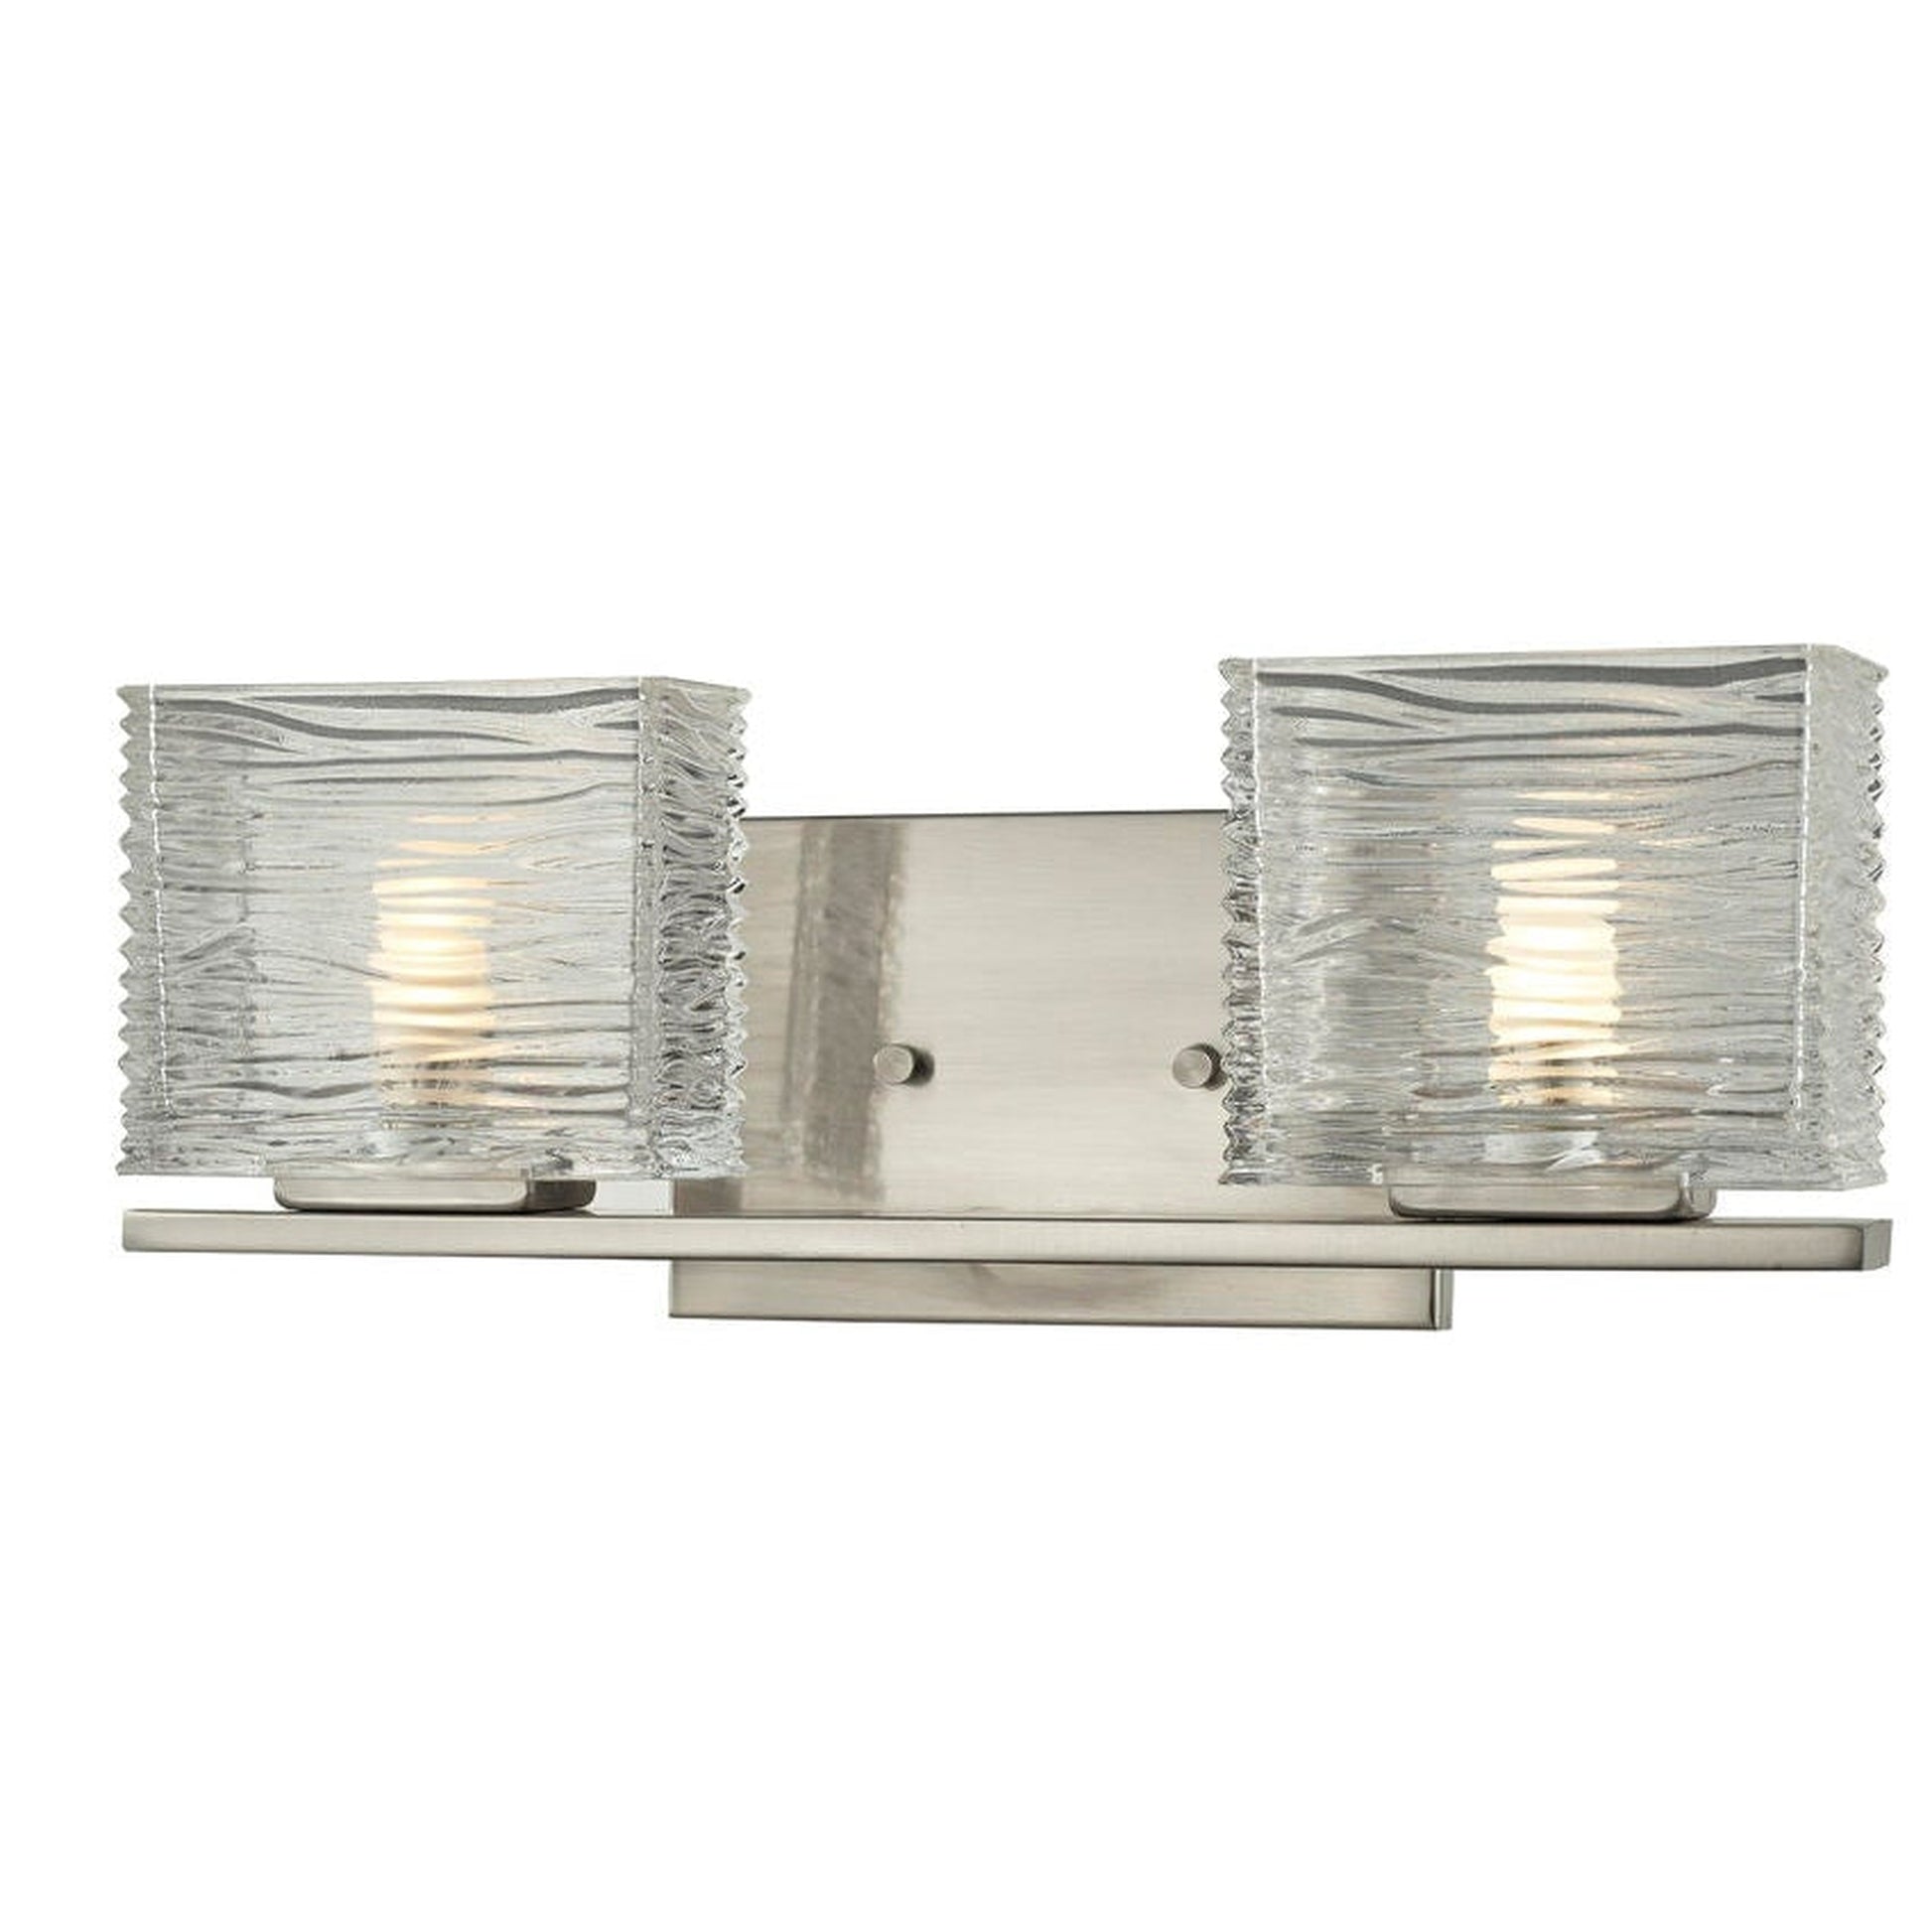 Z-Lite Jaol 15" 2-Light Clear Glass Shade Vanity Light With Brushed Nickel Frame Finish